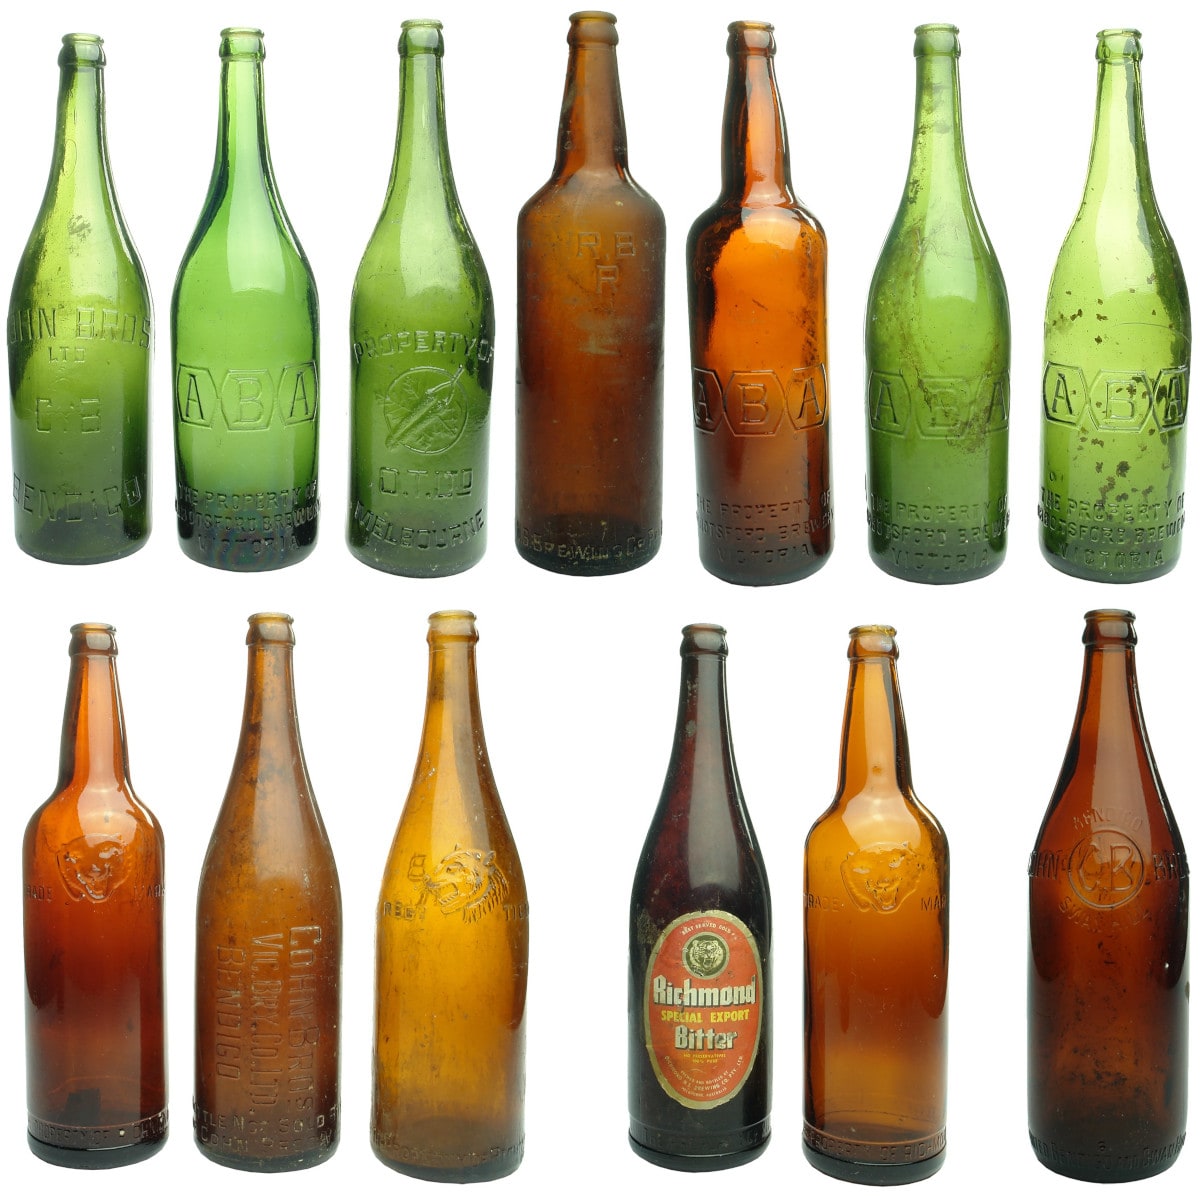 13 Different Victorian Crown Seal Beers: 4 x Abbotsford Brewery ABA; 1 x OT; 3 x Cohn Bros; 5 x Richmond Brewery including one labelled. (Victoria)